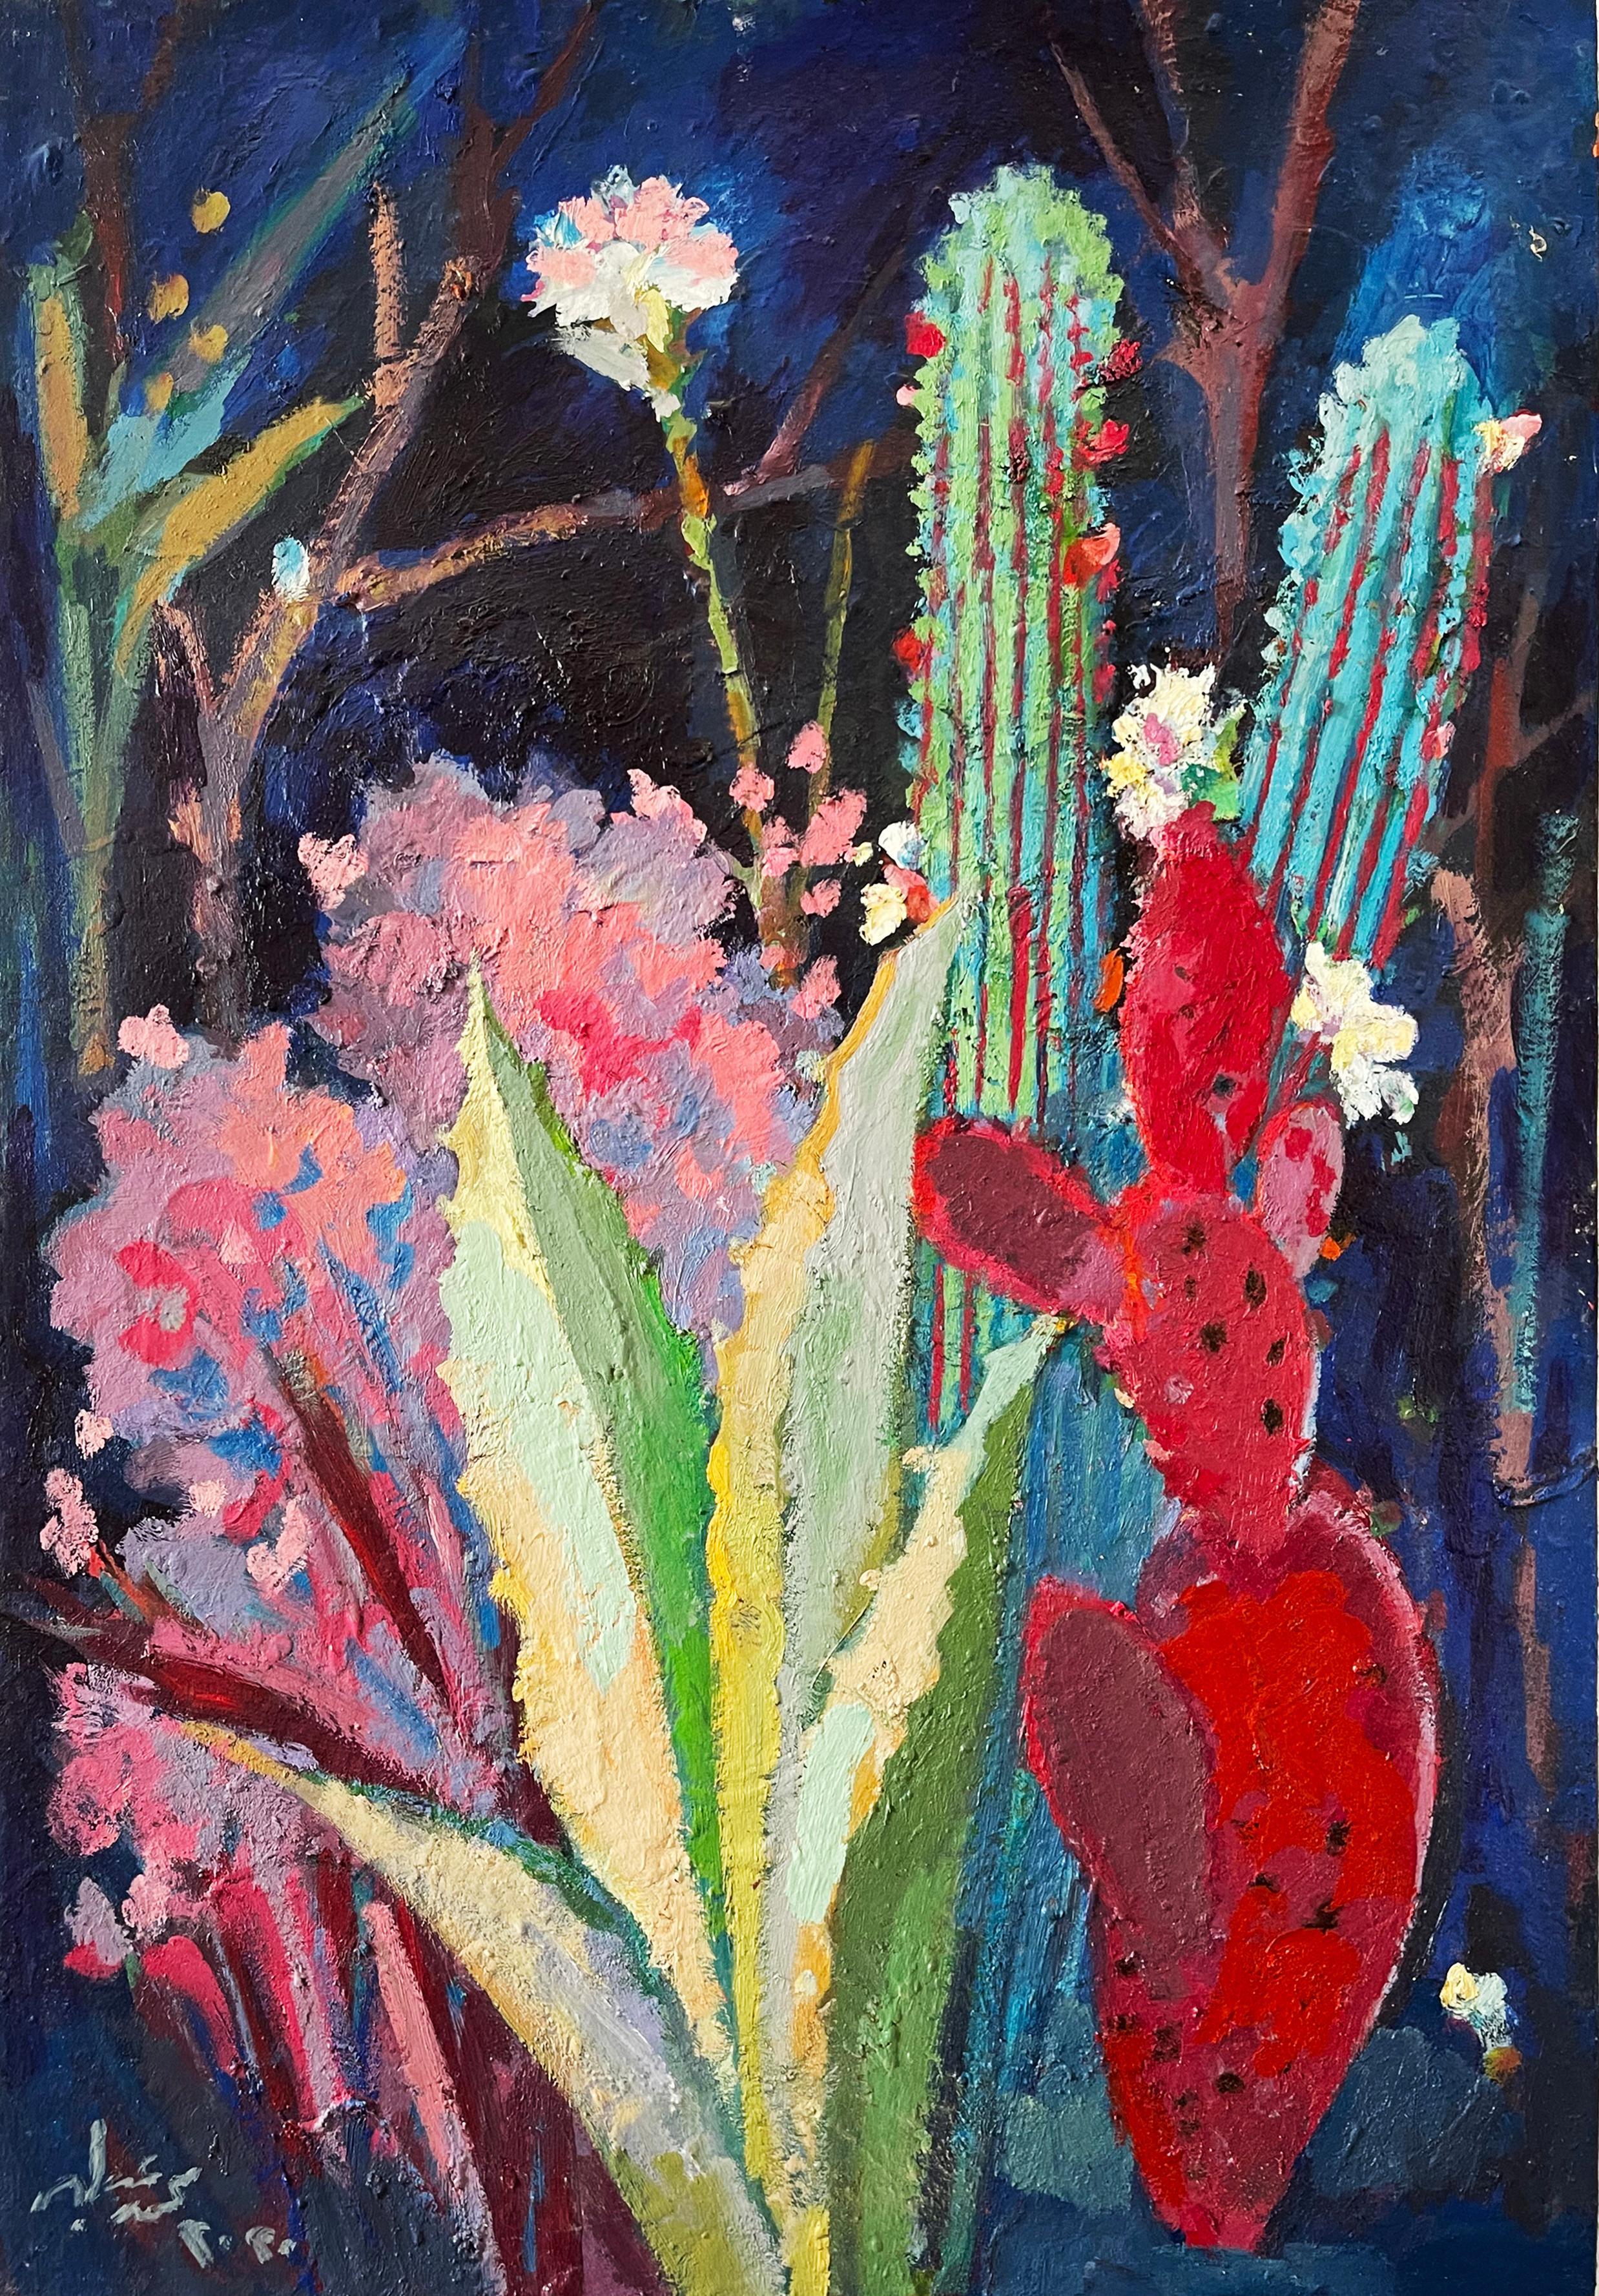 "Cactus 15" Oil Painting 35" x 26" inch by Mohamed Abla